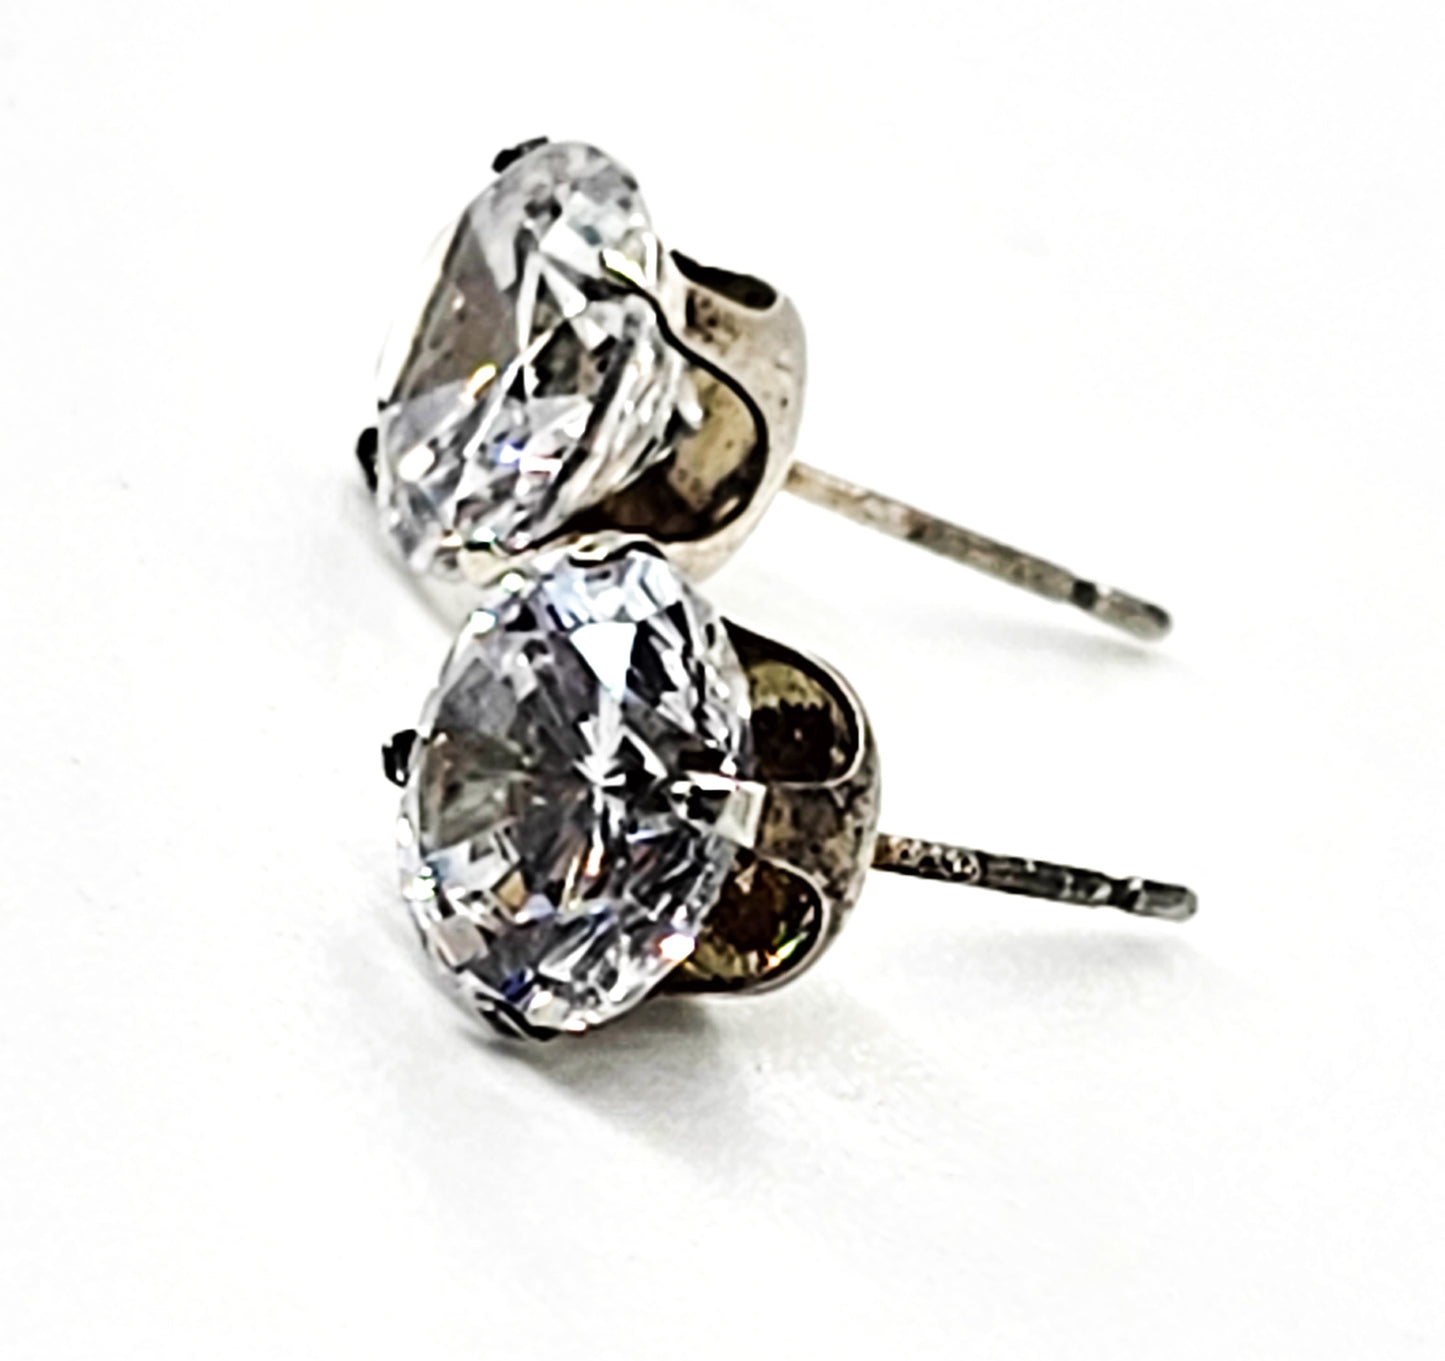 Cubic Zirconia CZ 2ct clear prong set solitaire sterling silver stud earrings